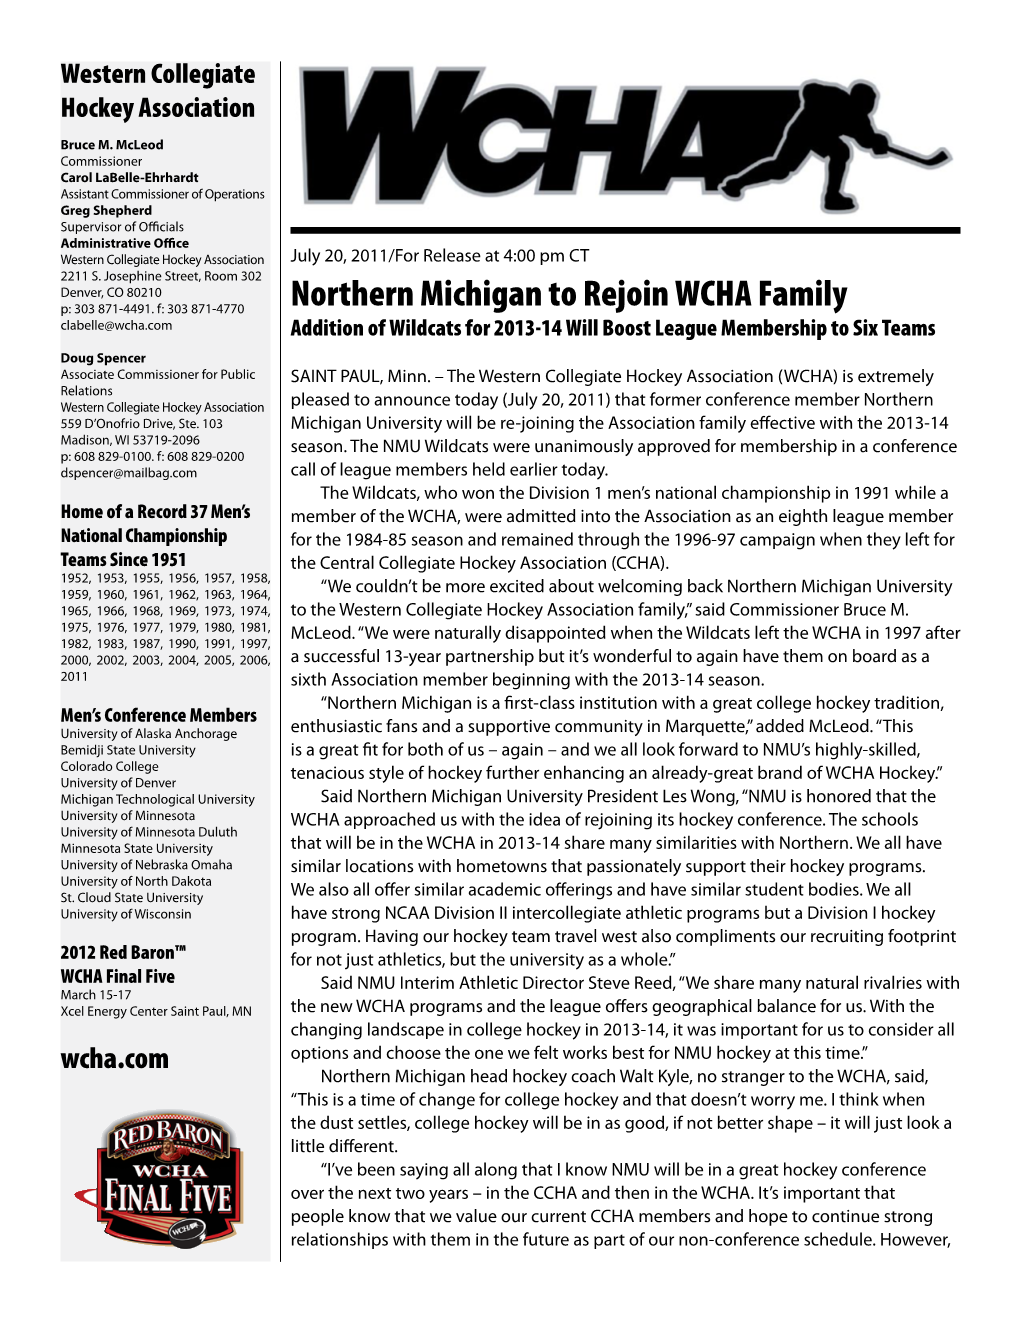 Northern Michigan to Rejoin WCHA Family